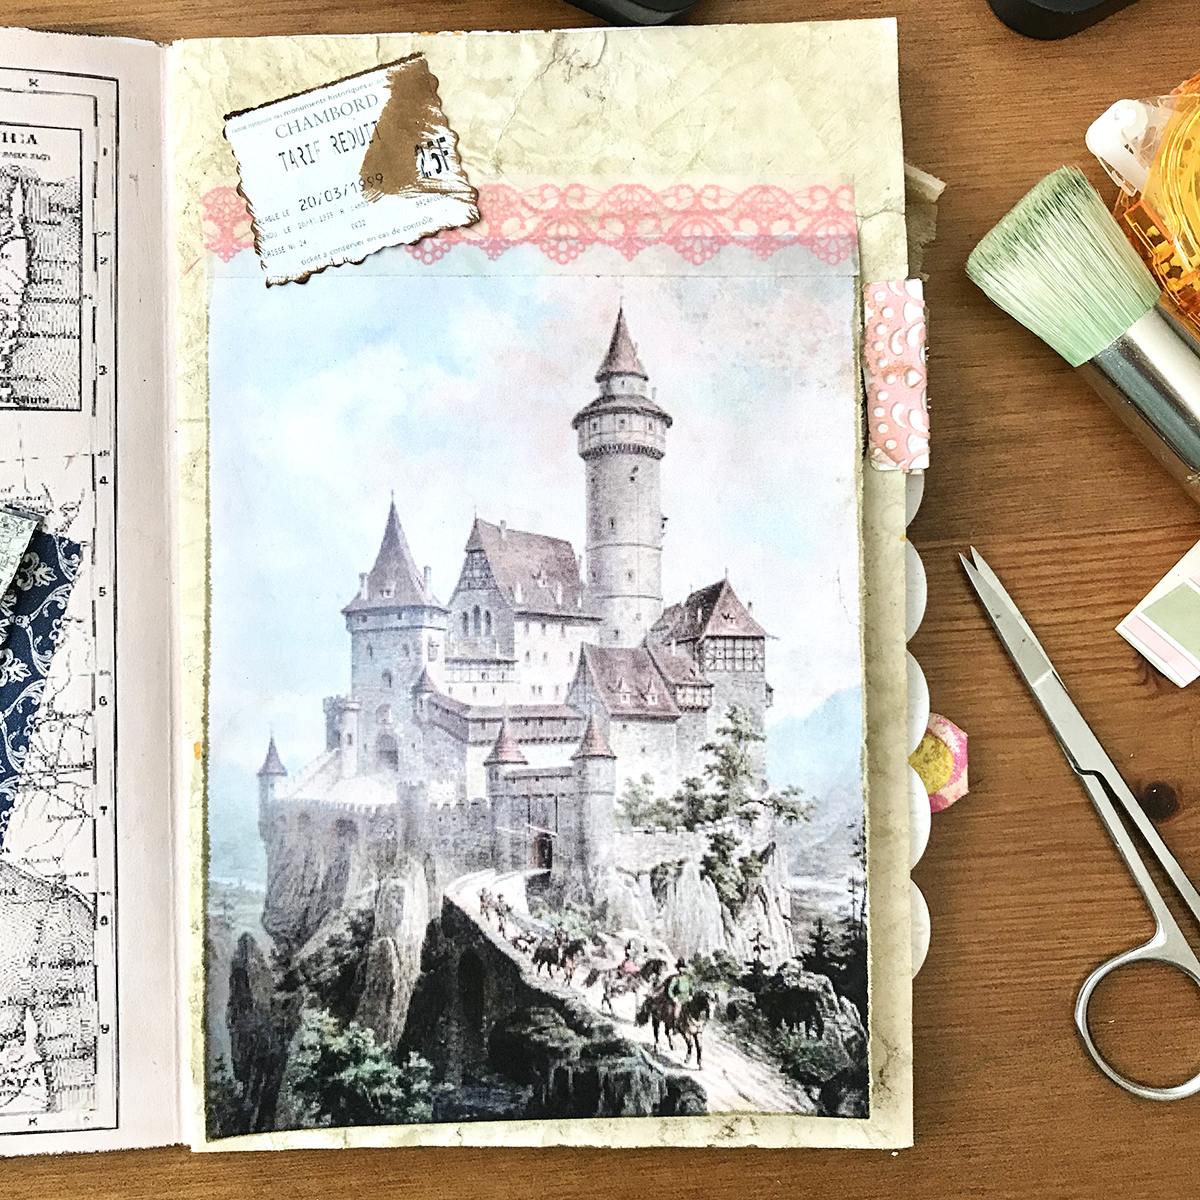 junk journal page with castle and scissors